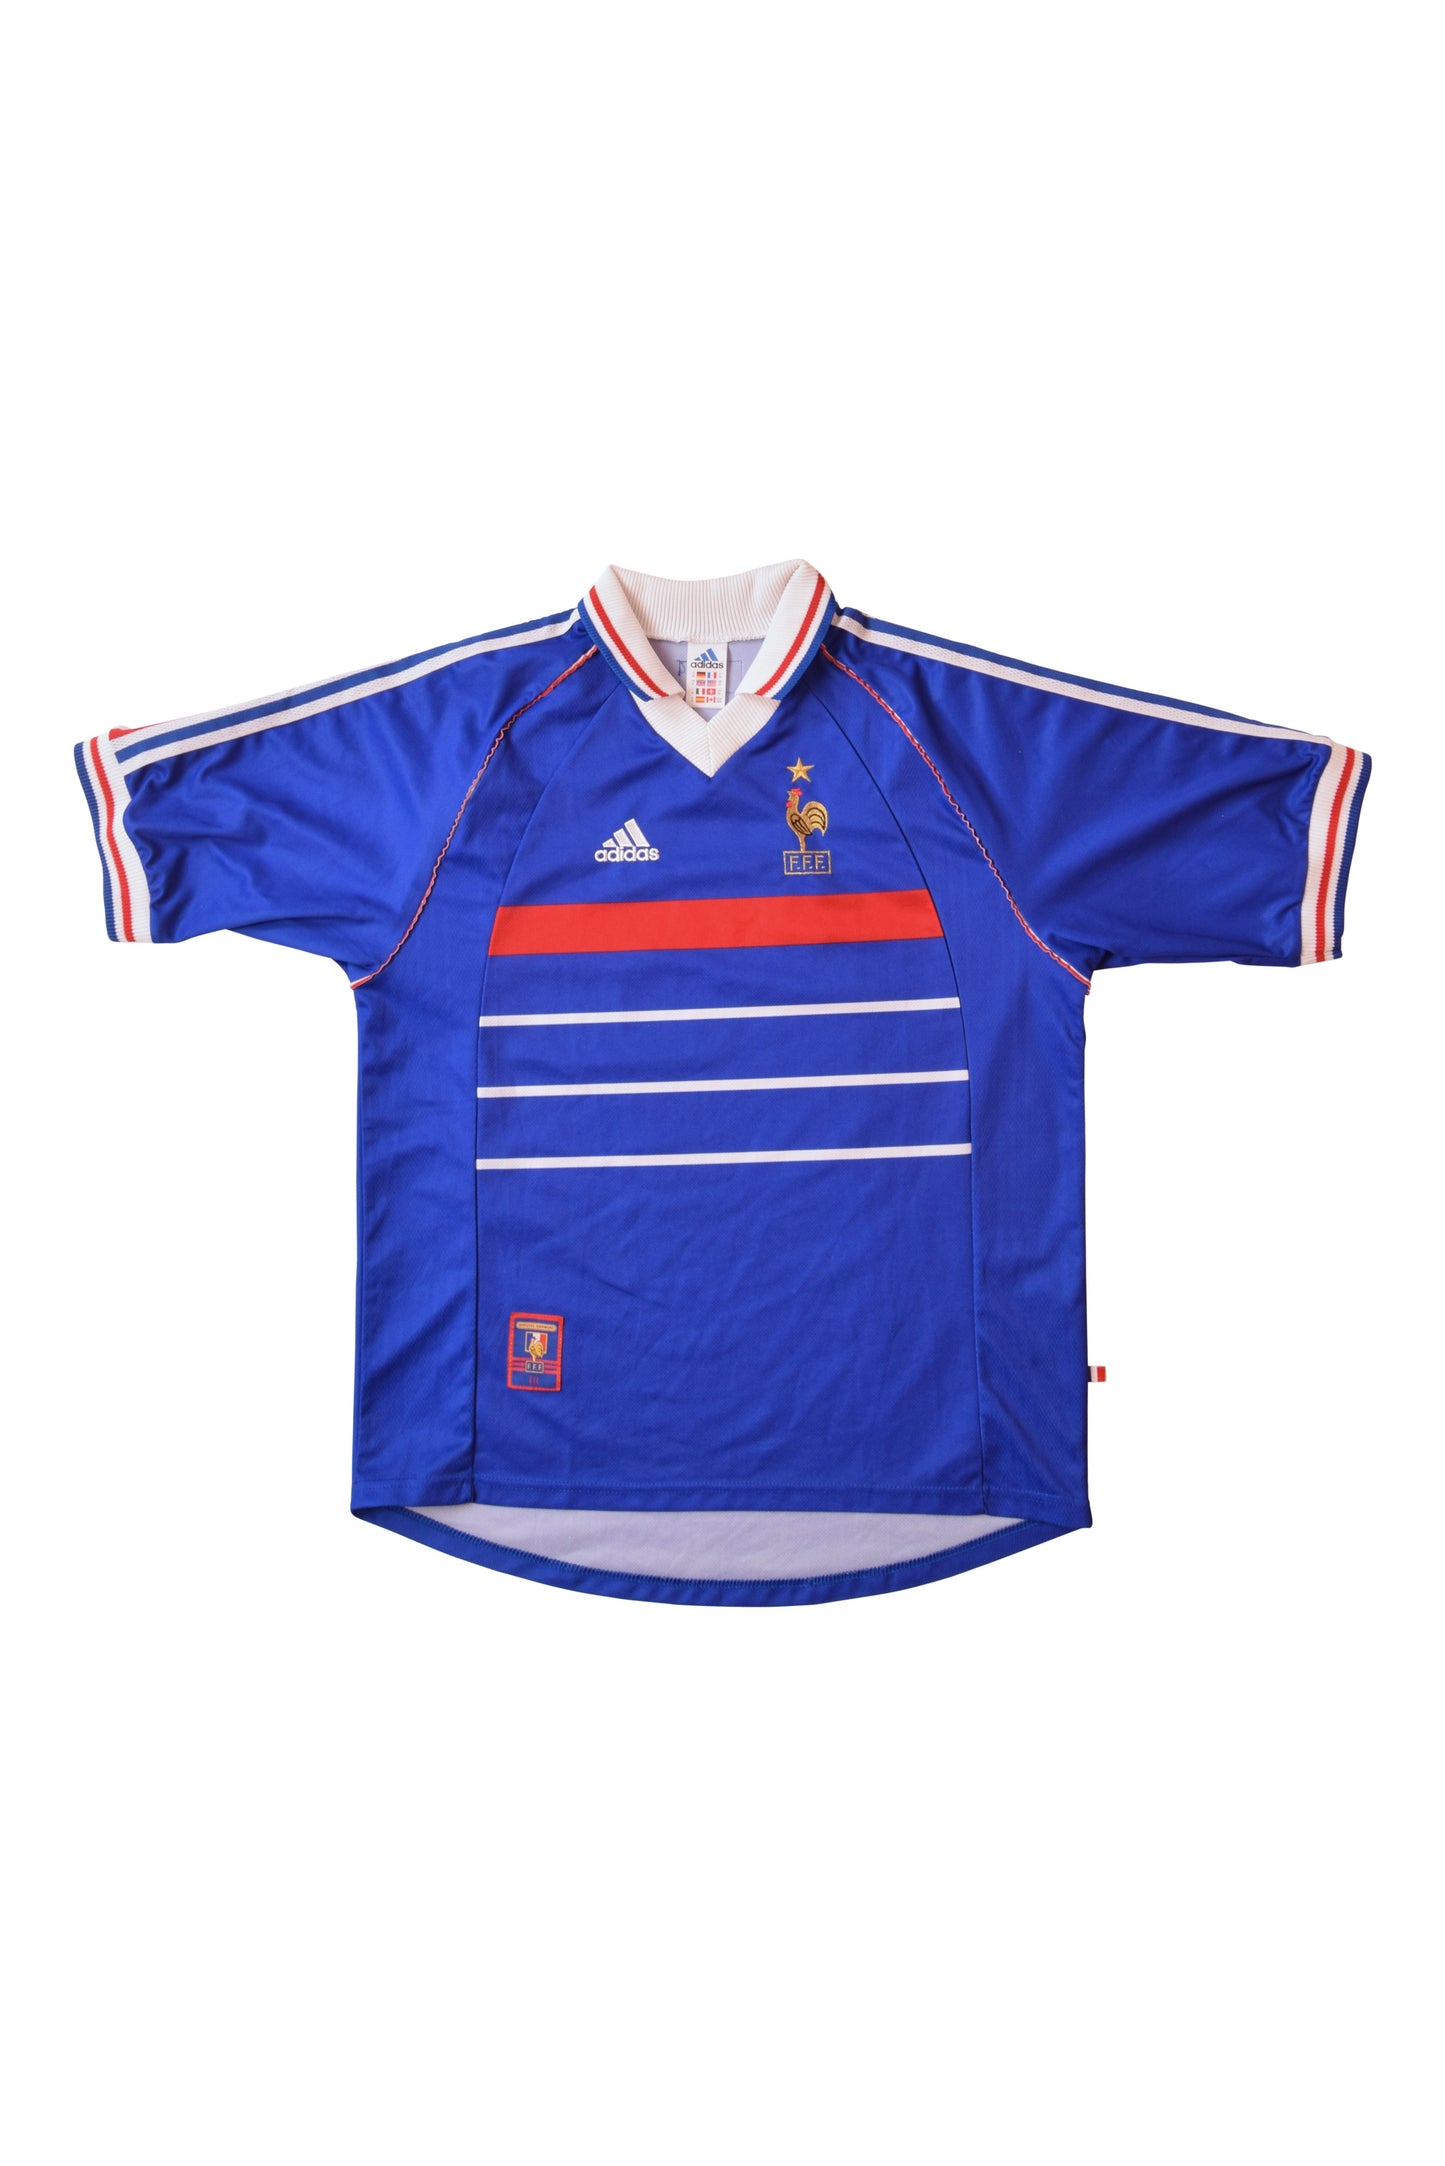 Vintage France Adidas Home Football Shirt 1998 World Cup Size S-M